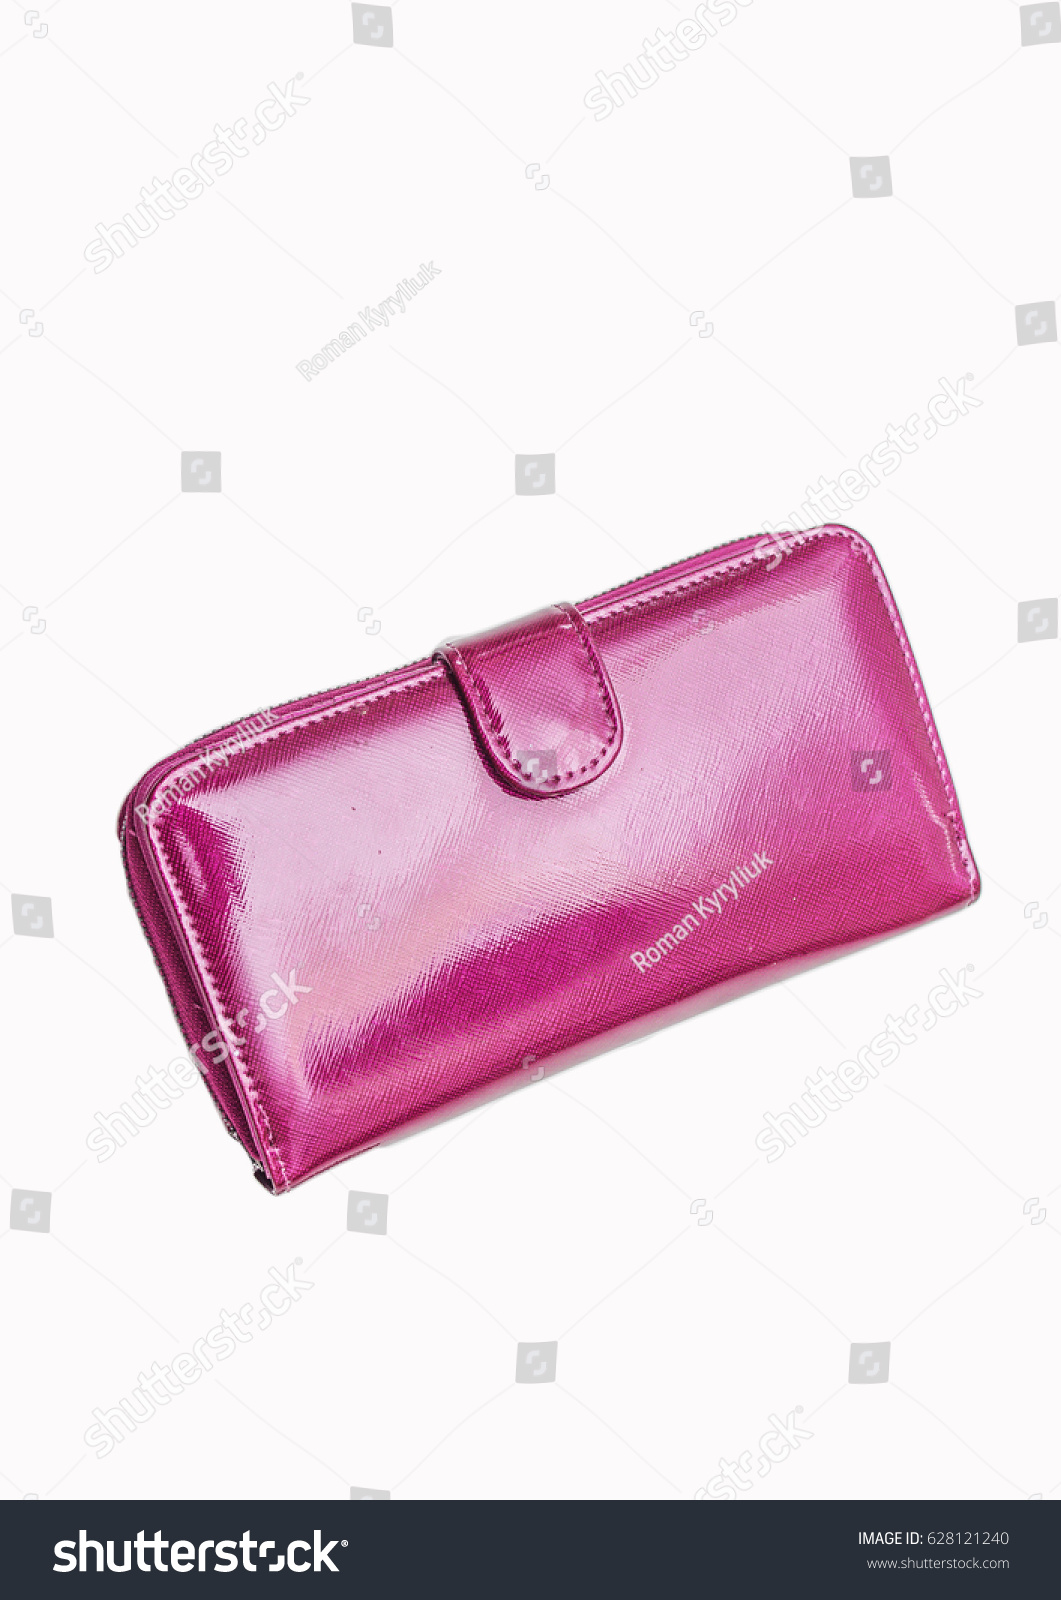 Pink purse. Glossy purse on a white background #628121240